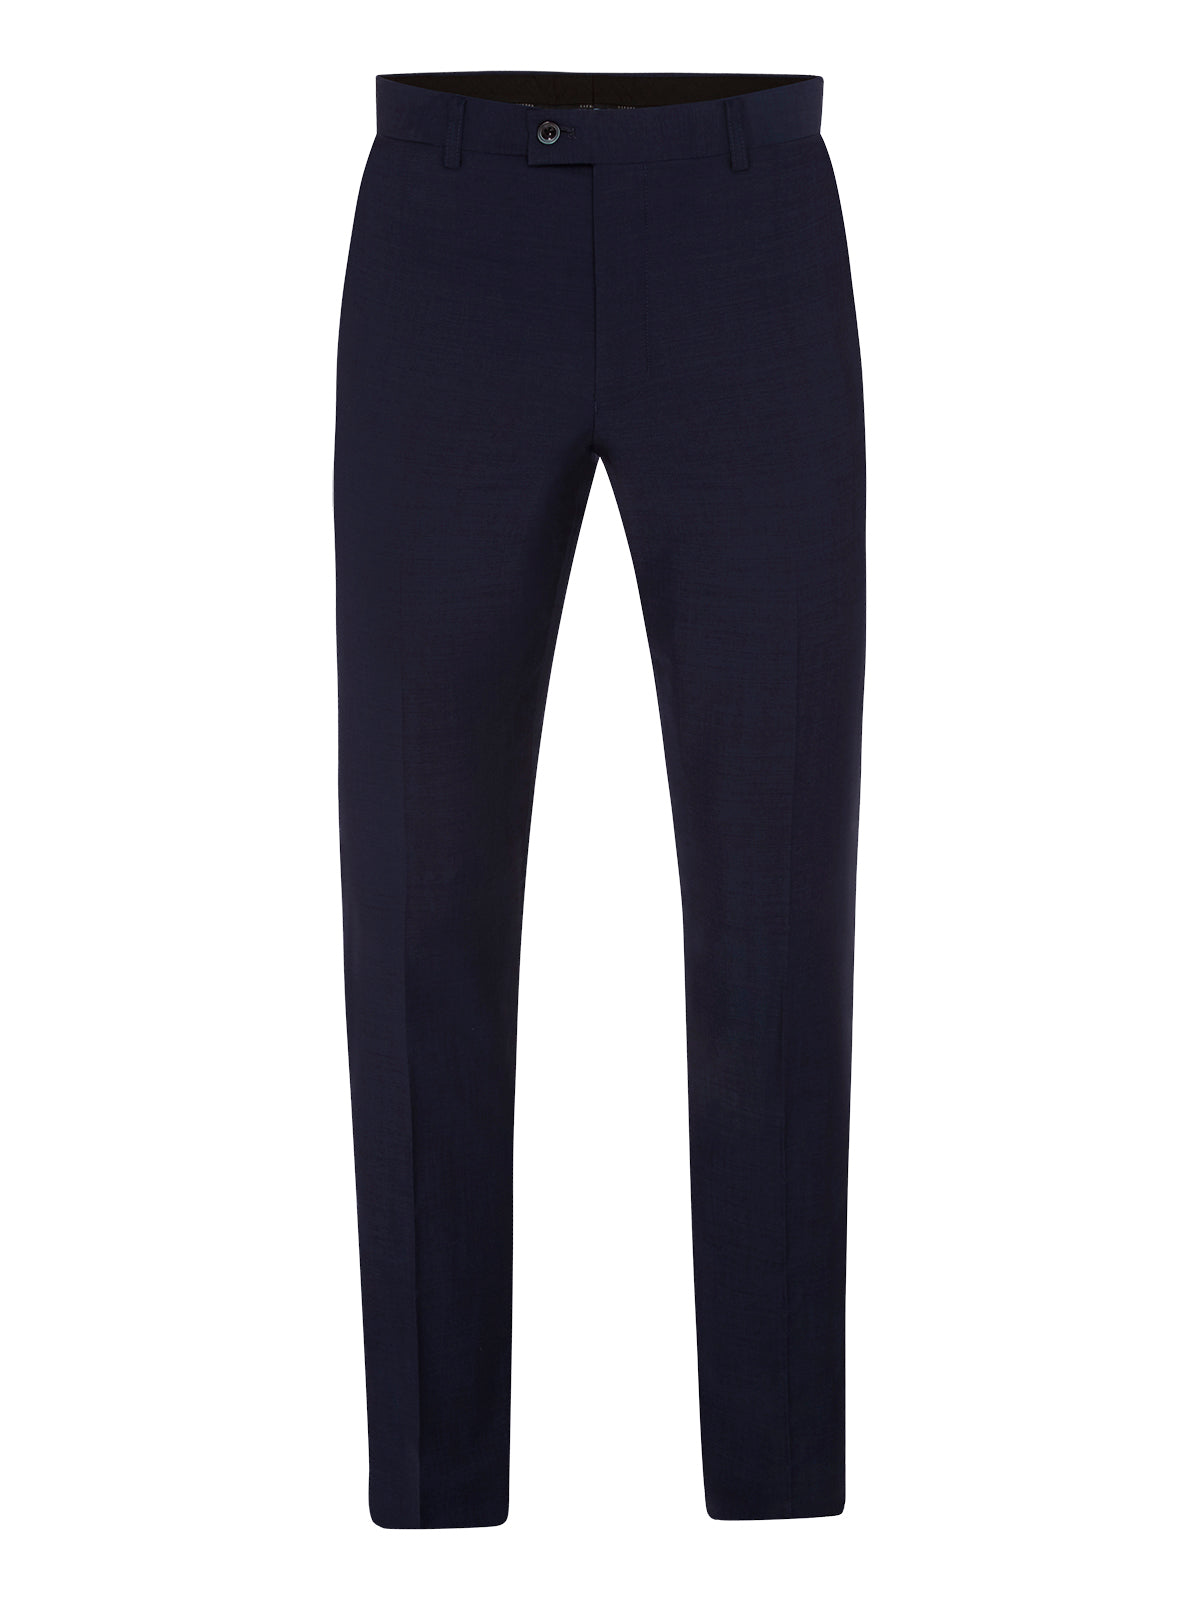 NEW HOPKINS SUIT TROUSERS NVY